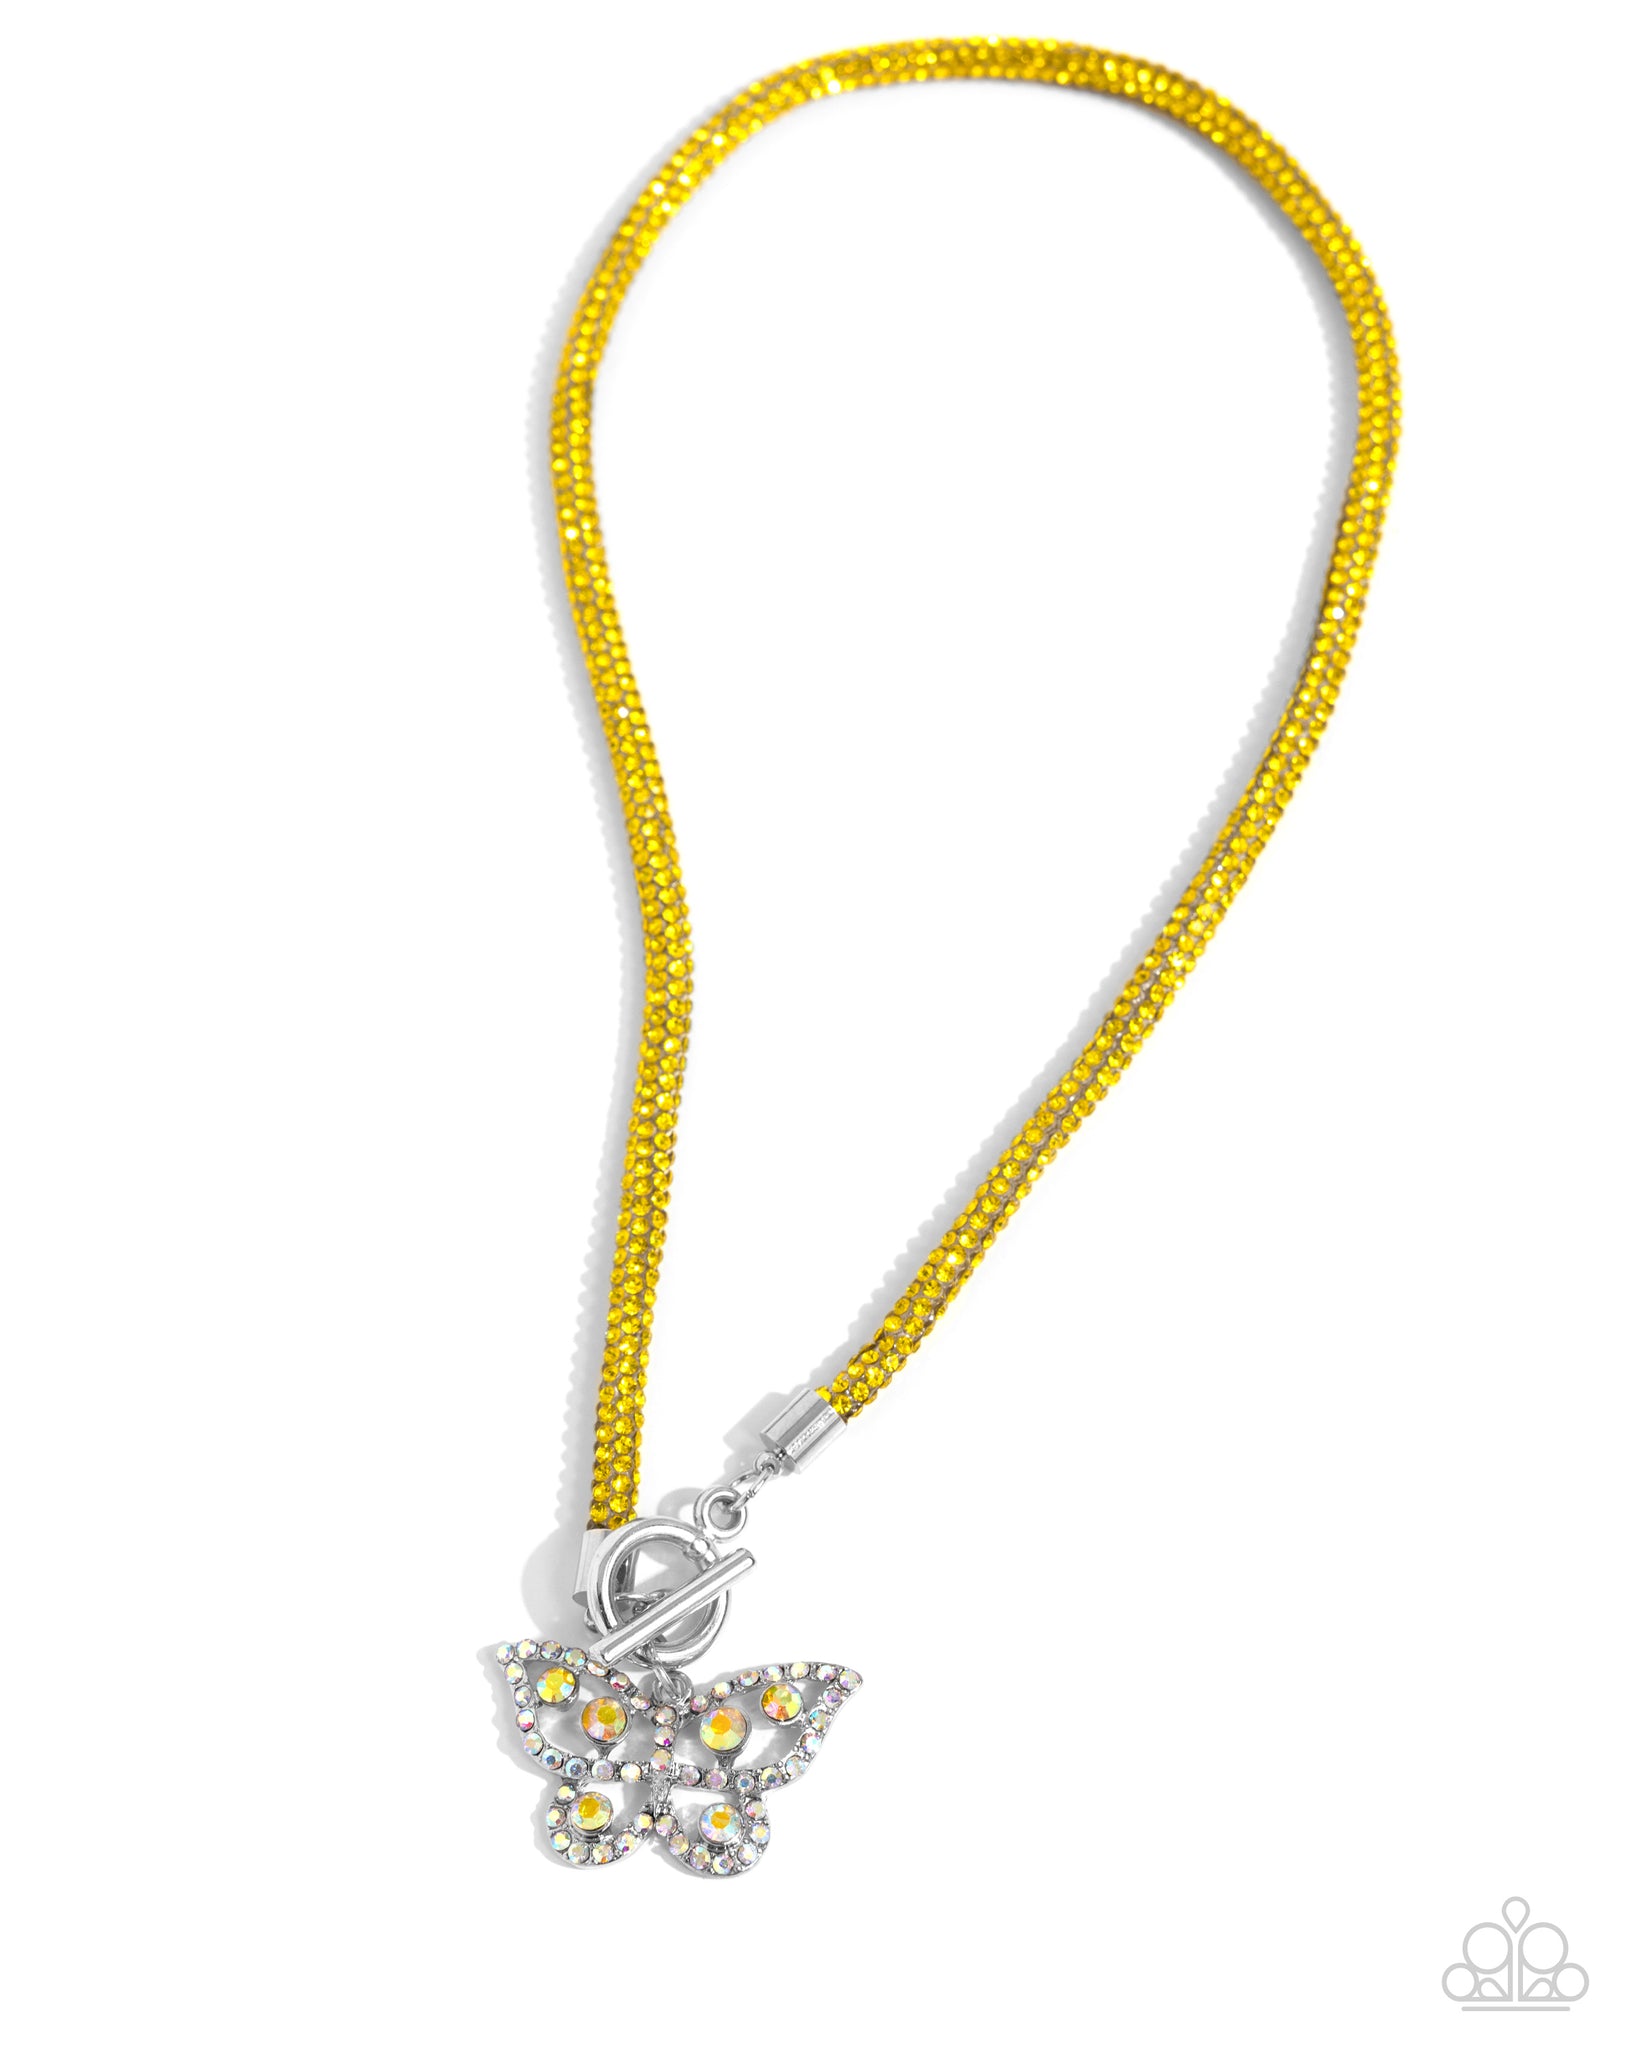 On SHIMMERING Wings Yellow Necklace